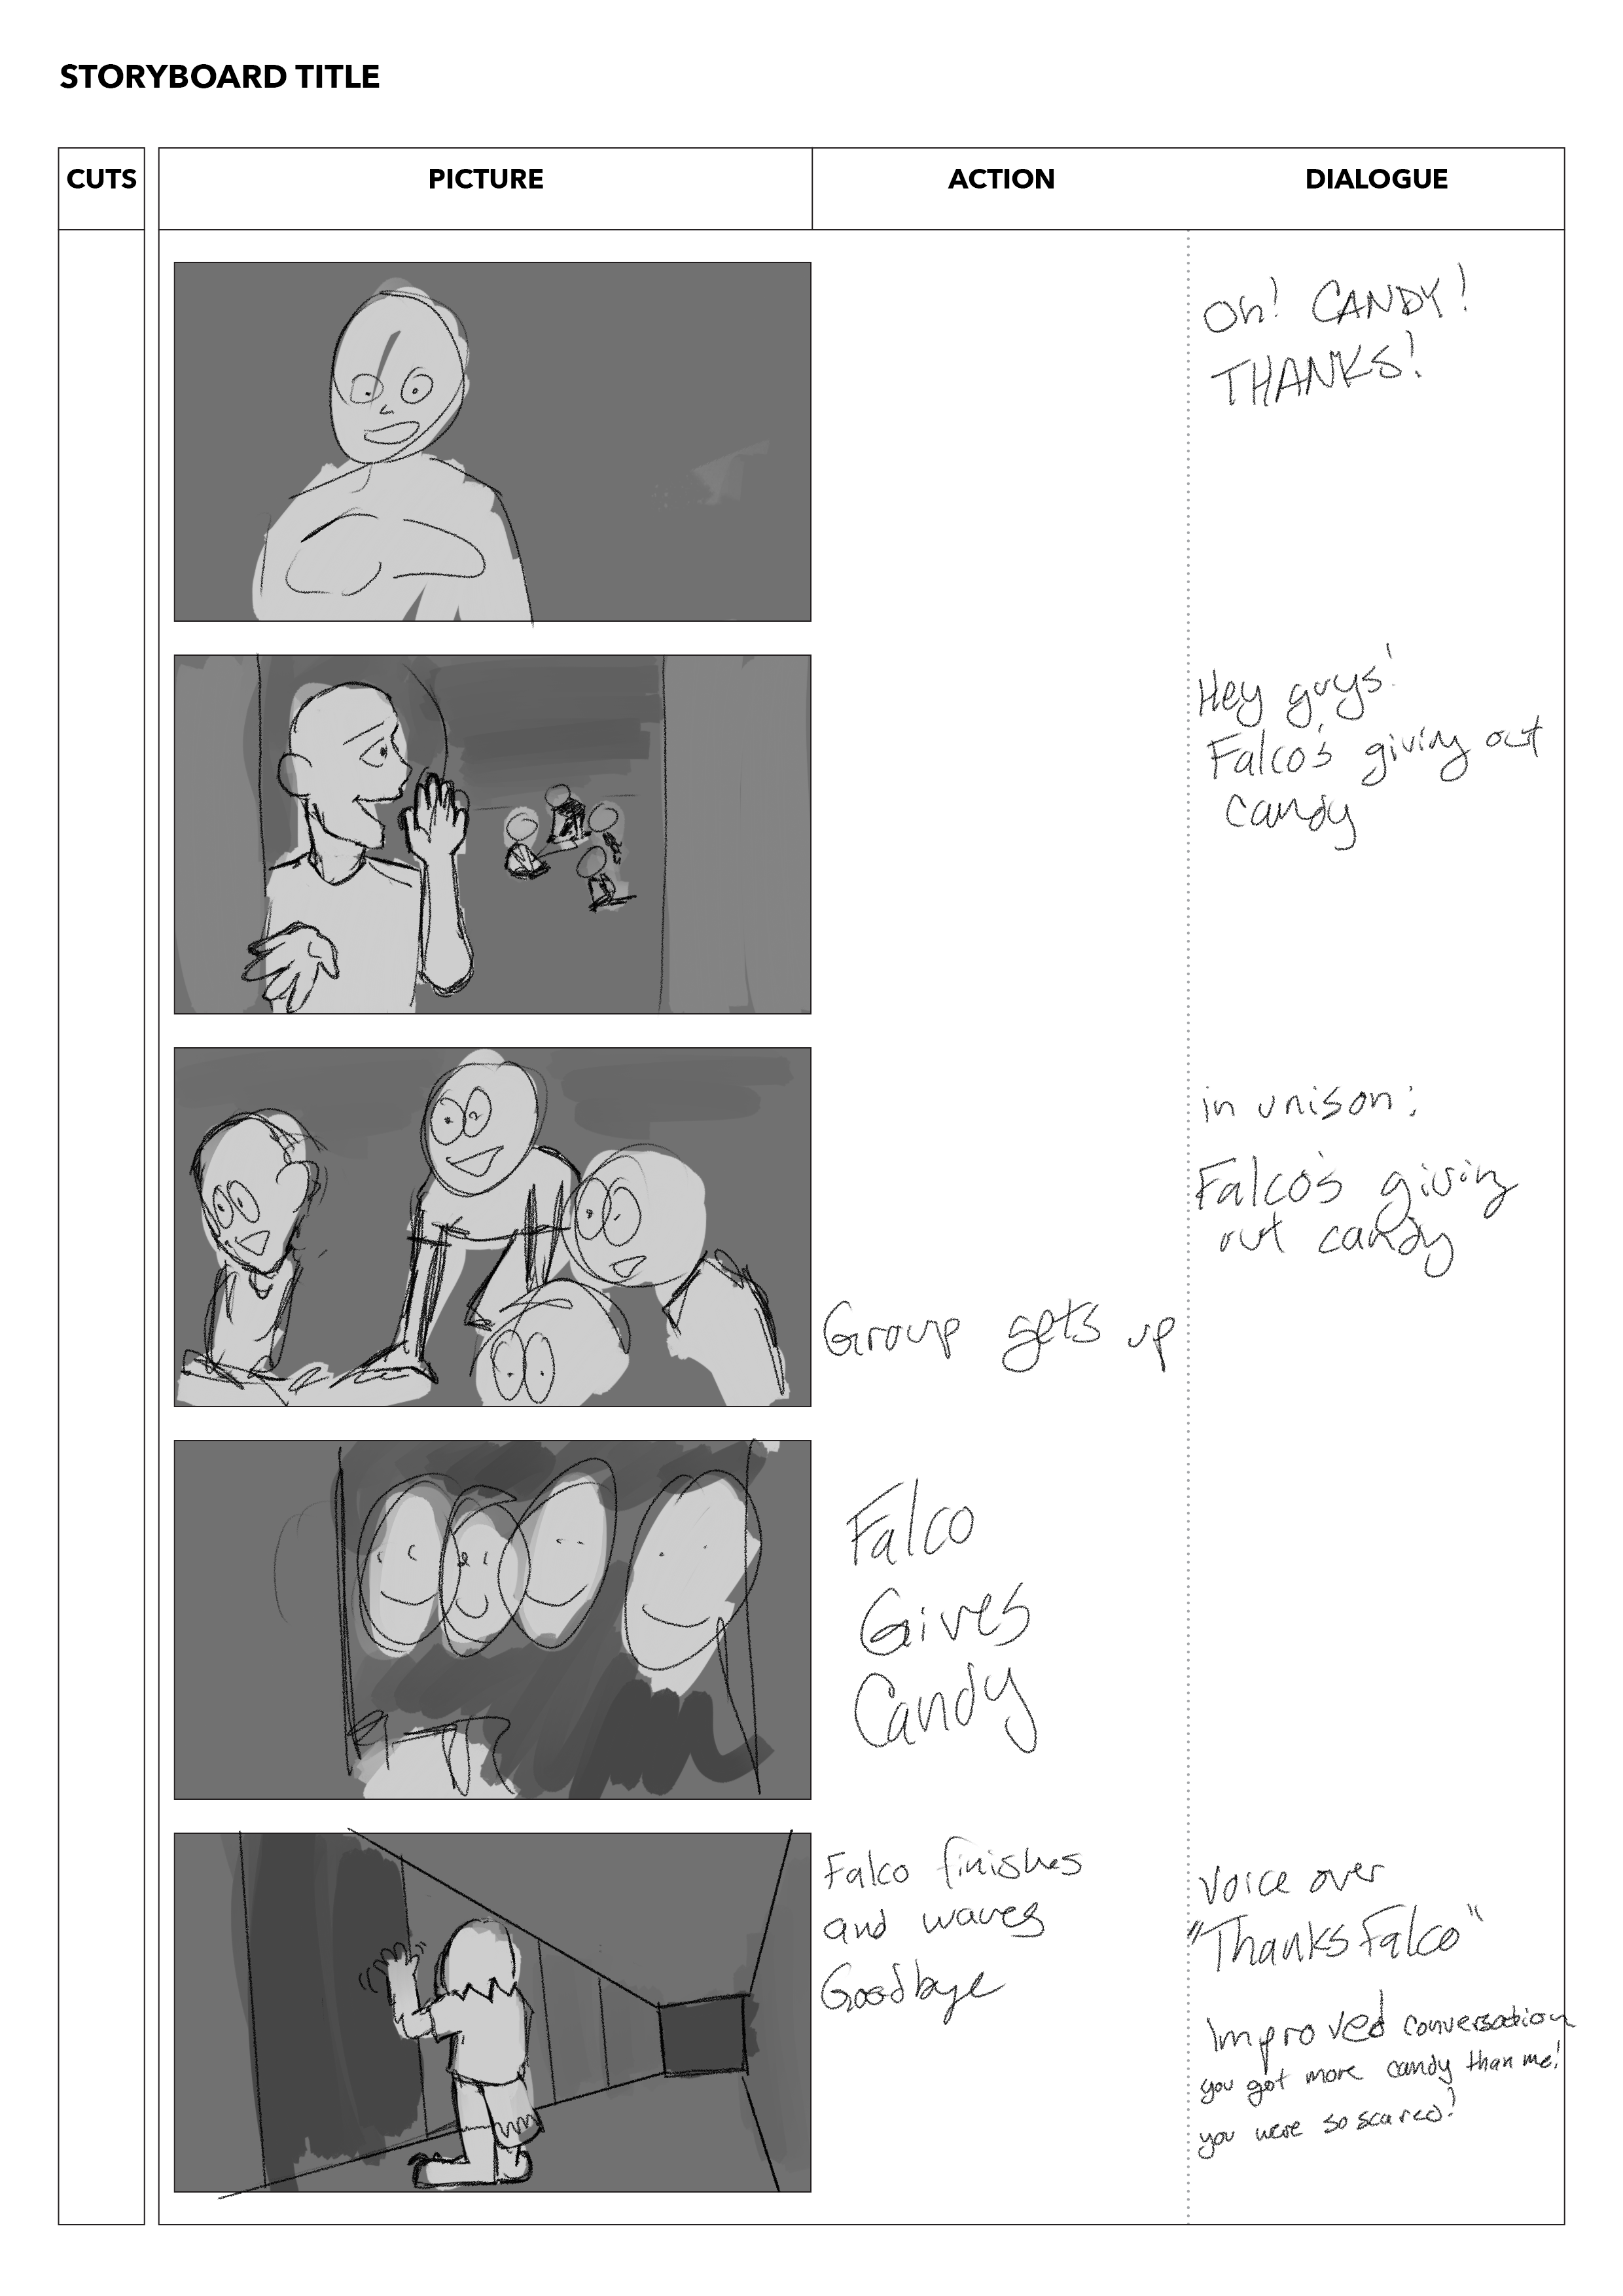 16_9_Storyboard_Template_page 8.png